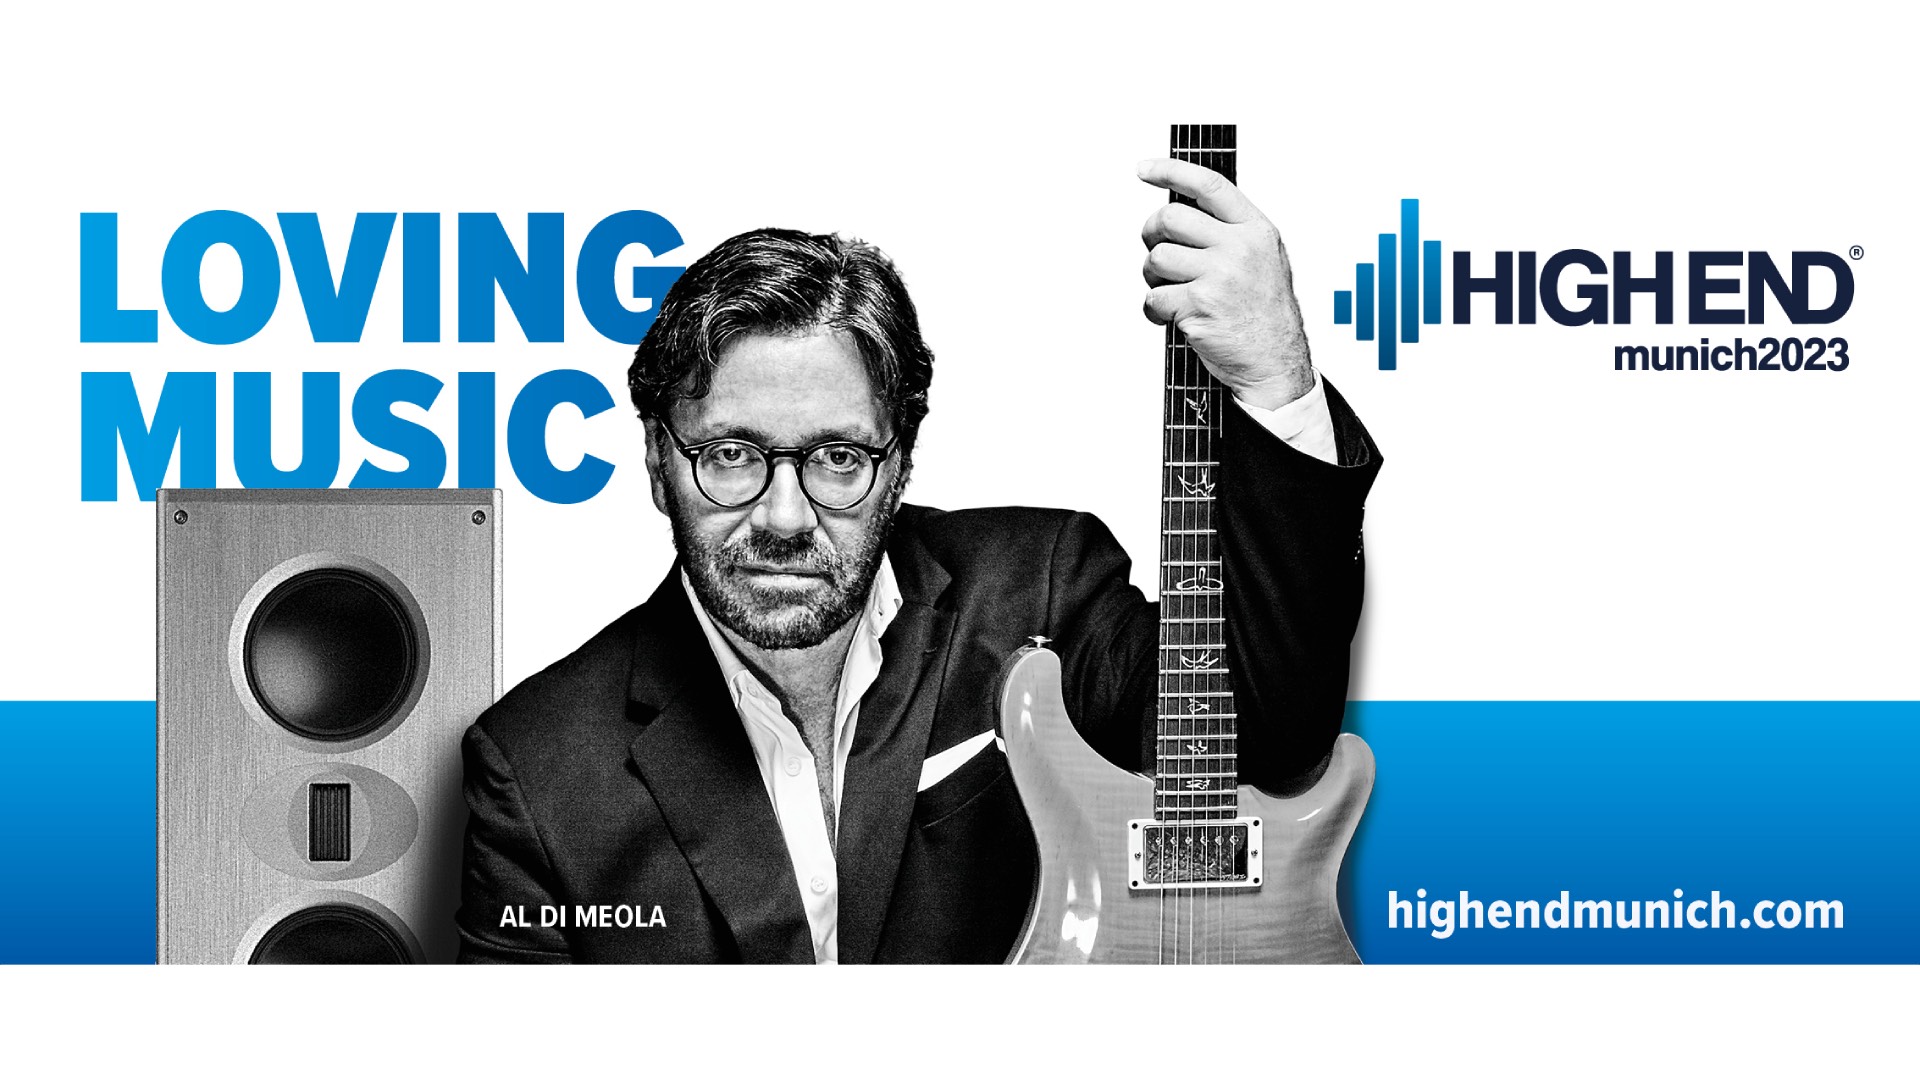 Al Di Meola and his guitar posing for the High End Munich. (Image Credit: High End Society)